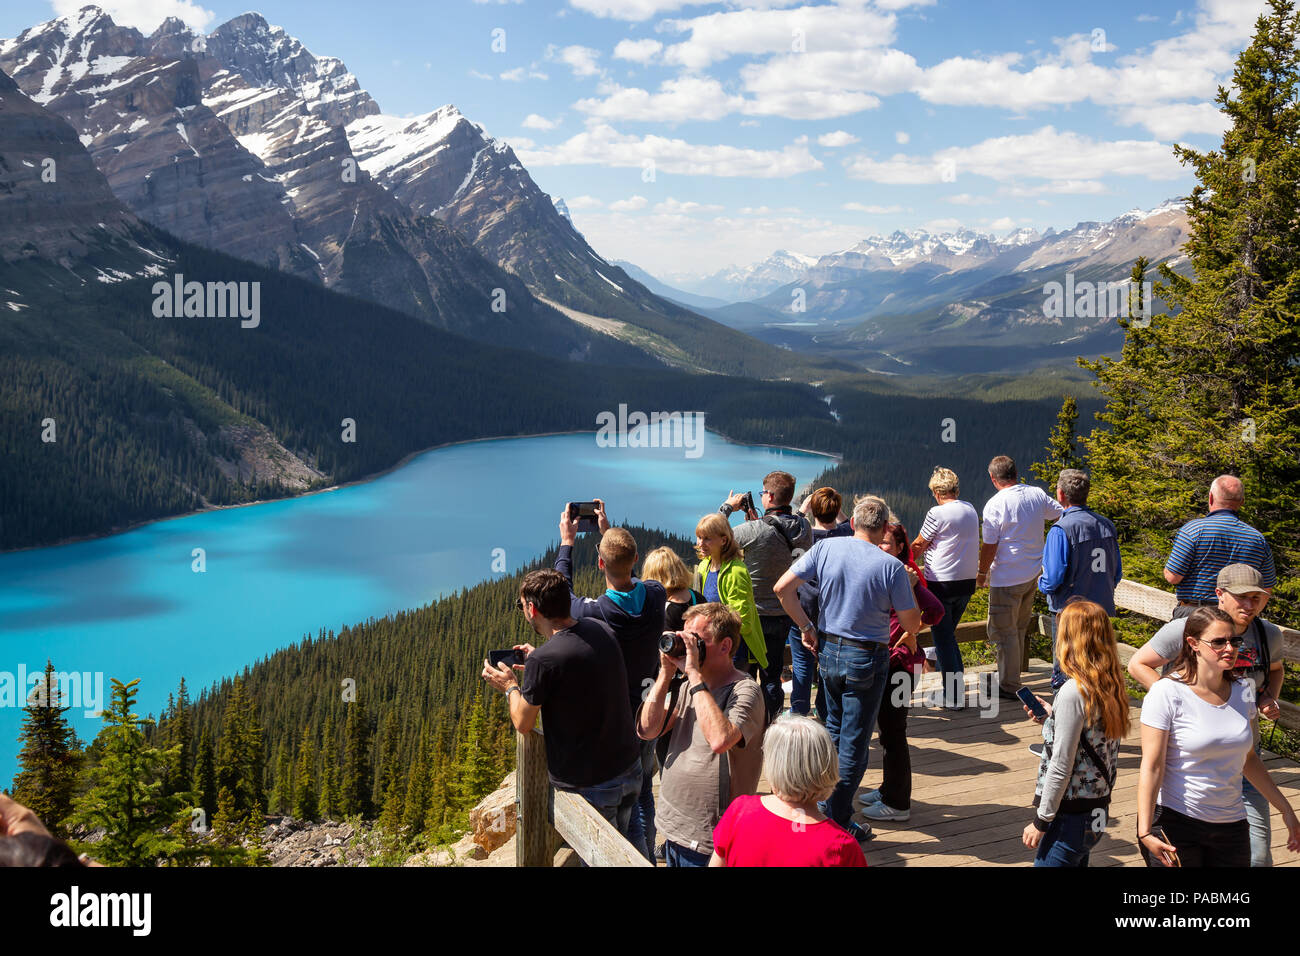 A Summer Trip for Everyone in Banff National Park